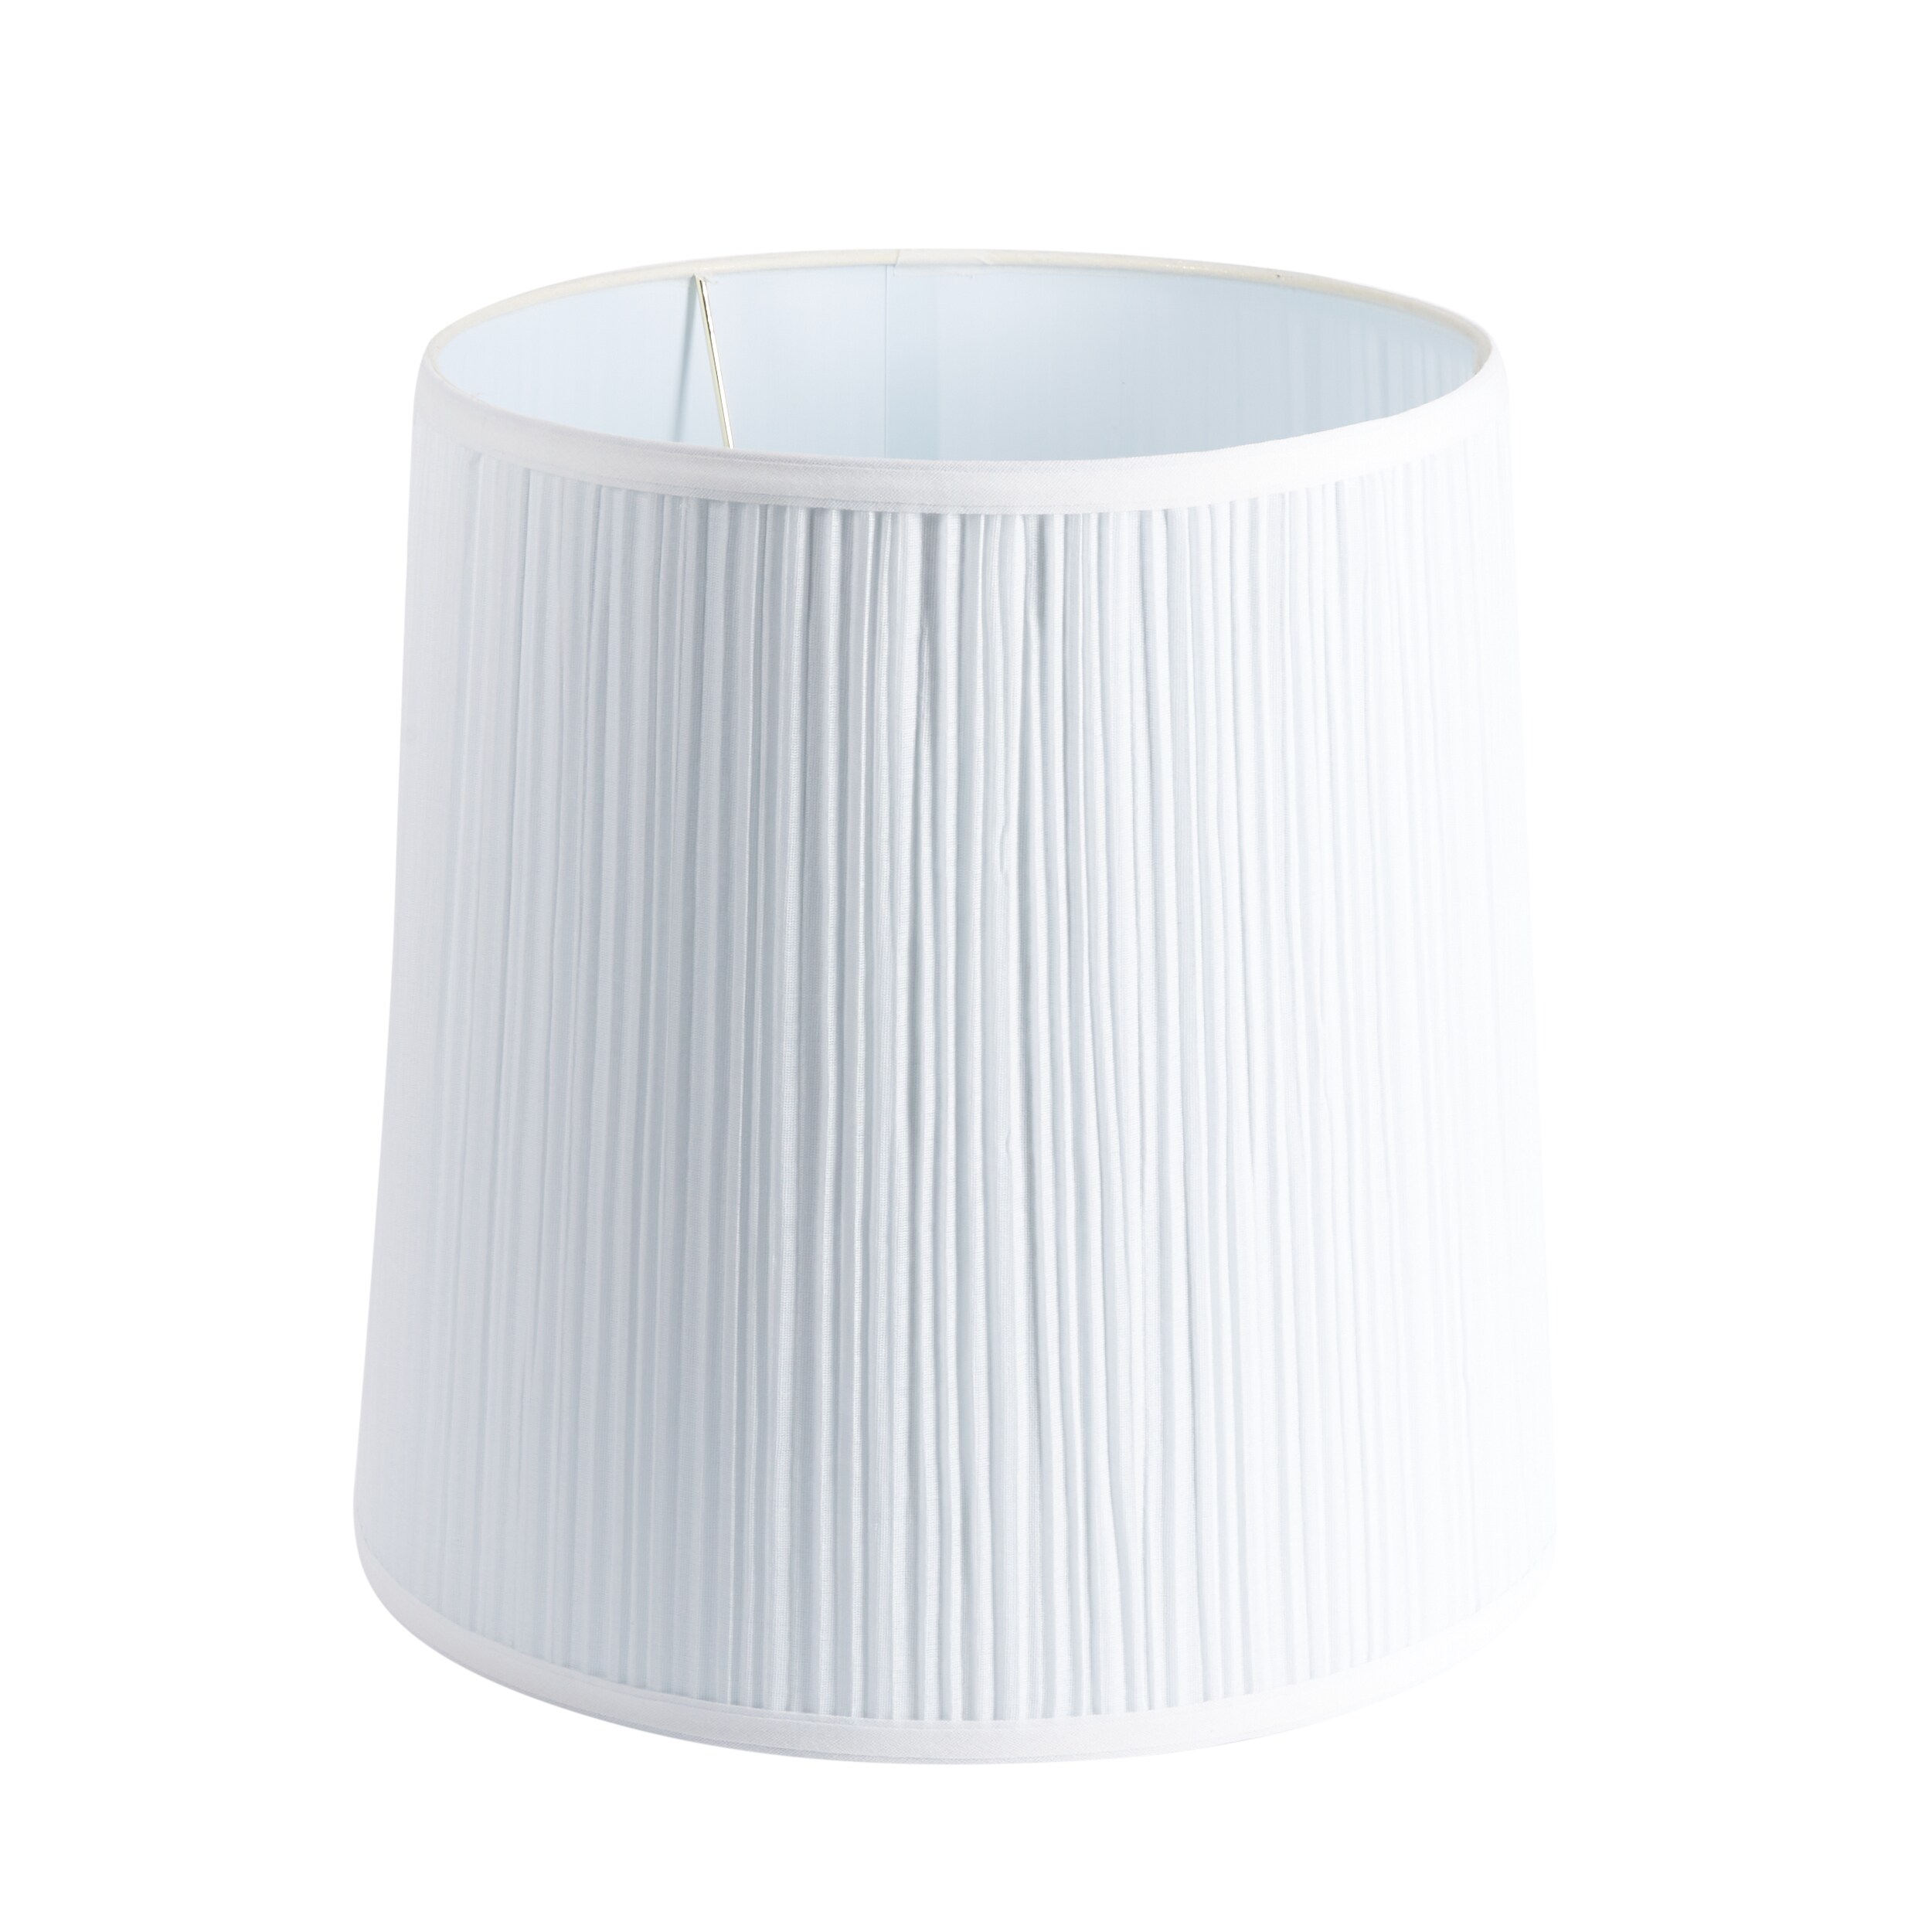 allen + roth 14-in x 14-in Beige Fabric Drum Lamp Shade in the Lamp ...